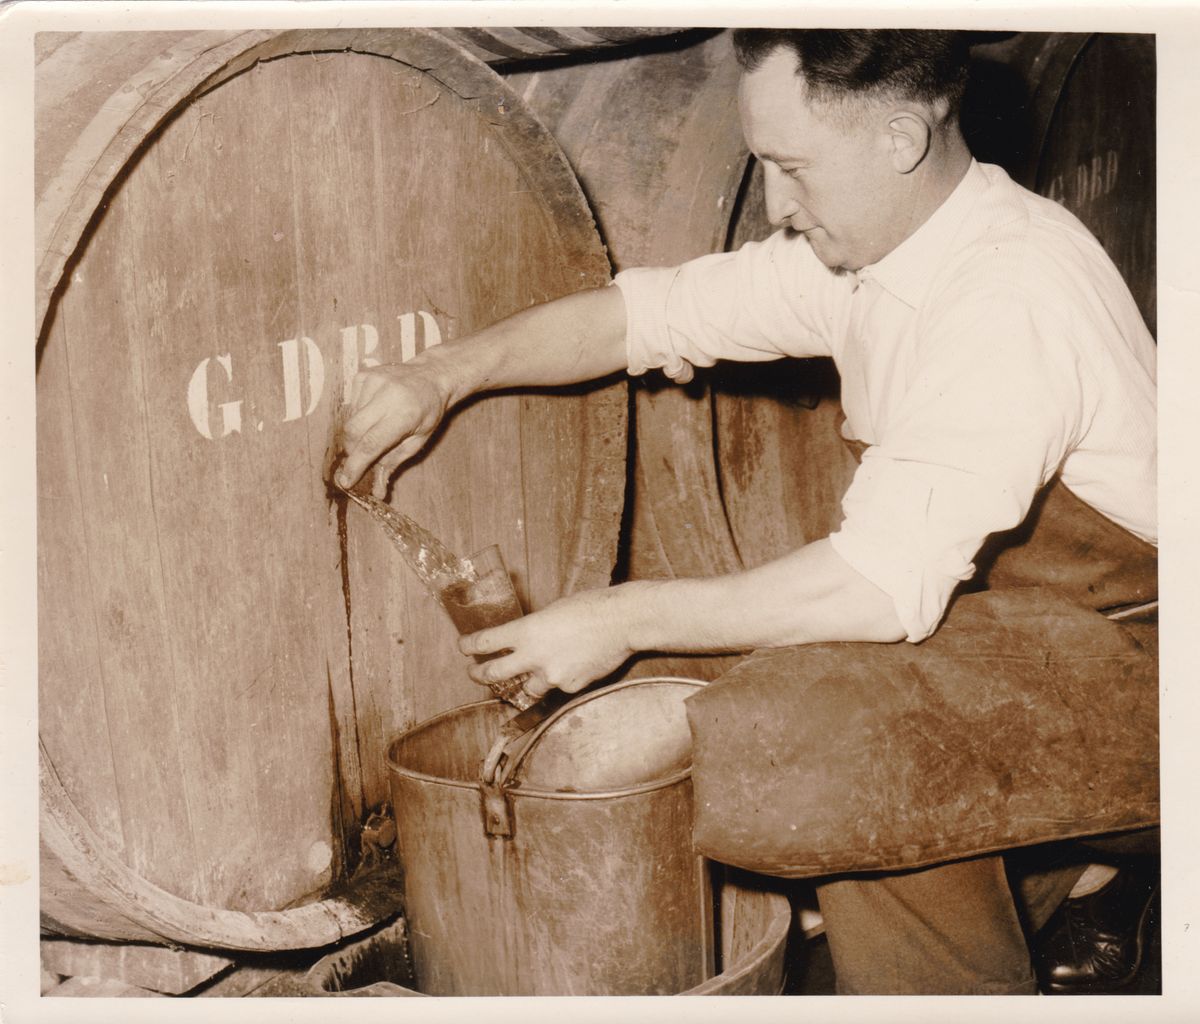 Gaston Debelder taps some lambic from a wooden barrel.